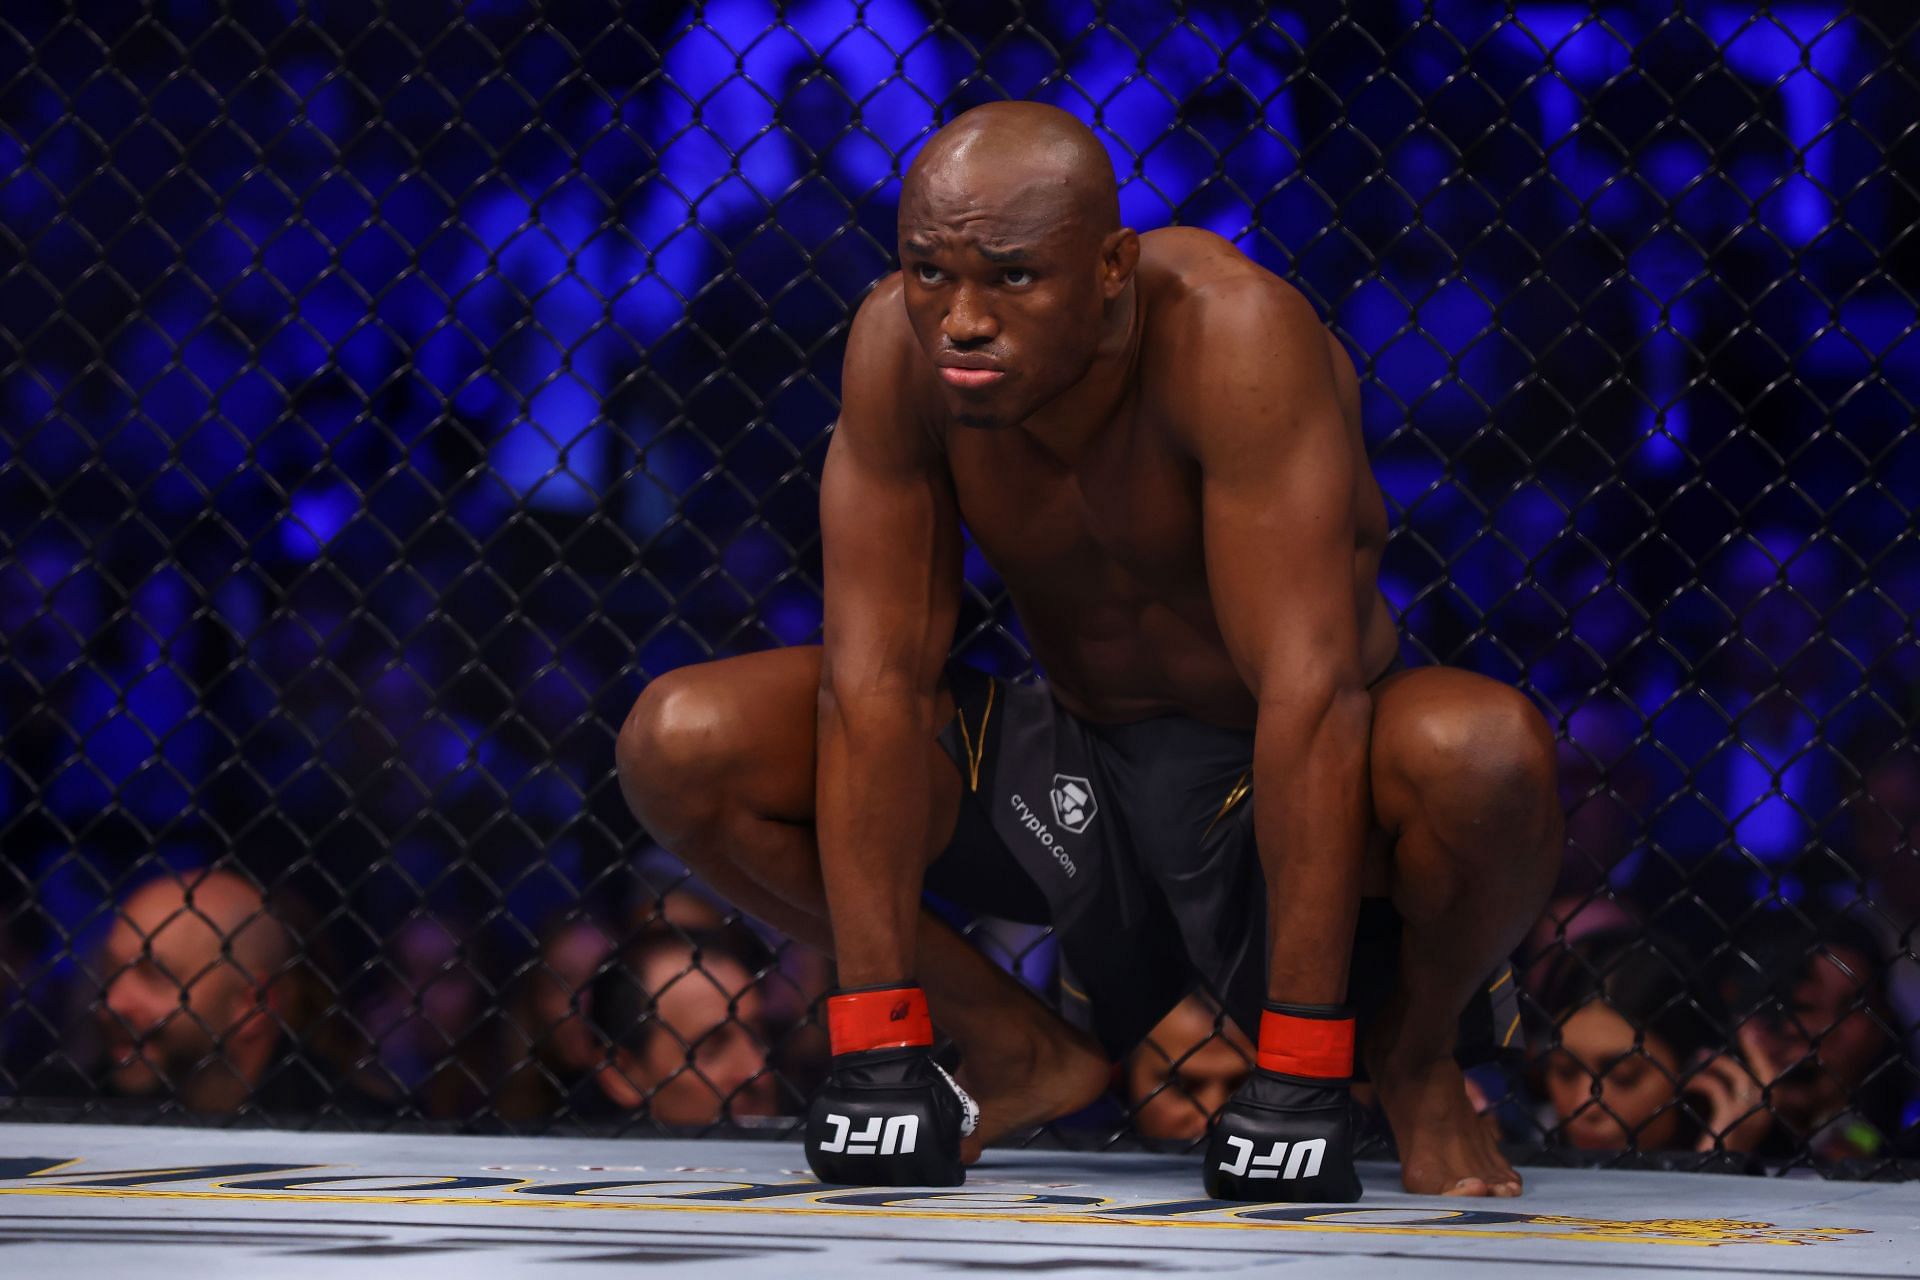 Kamaru Usman might not be far away from equalling the accomplishments of Georges St-Pierre